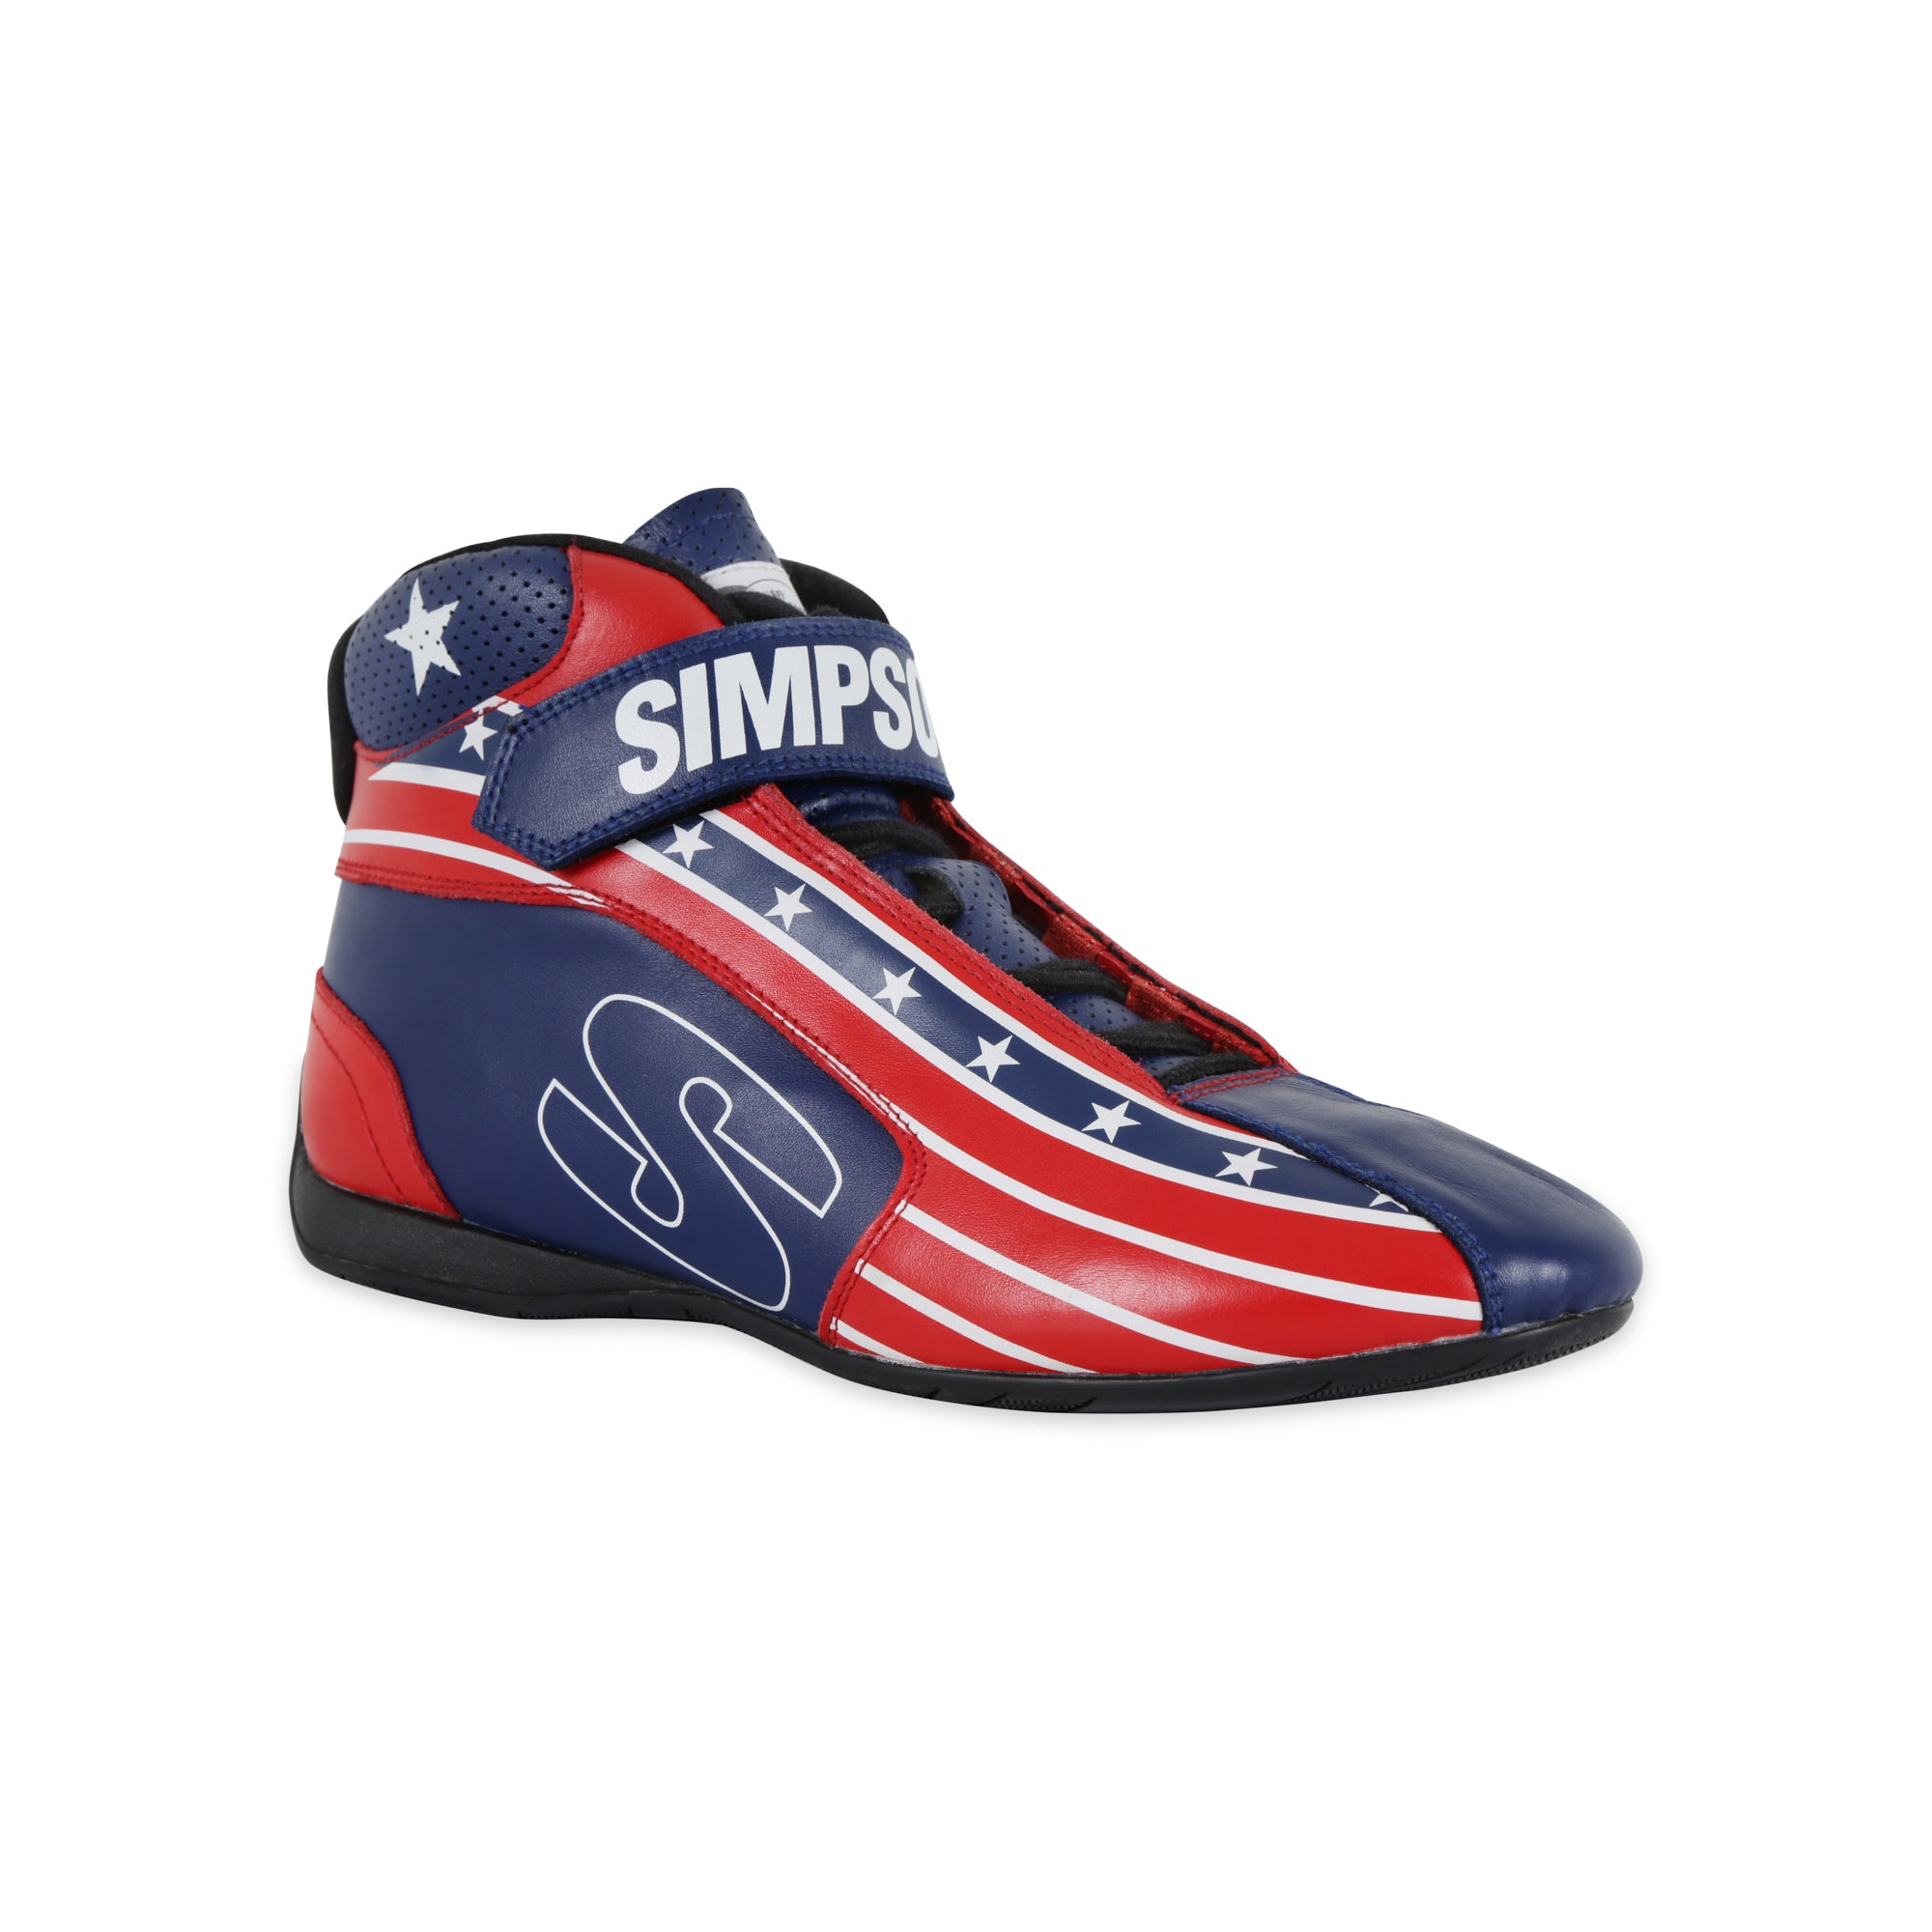 Simpson Shoe DNA X2 Patriot Size 11.5 Safety Clothing Driving Shoes and Boots main image